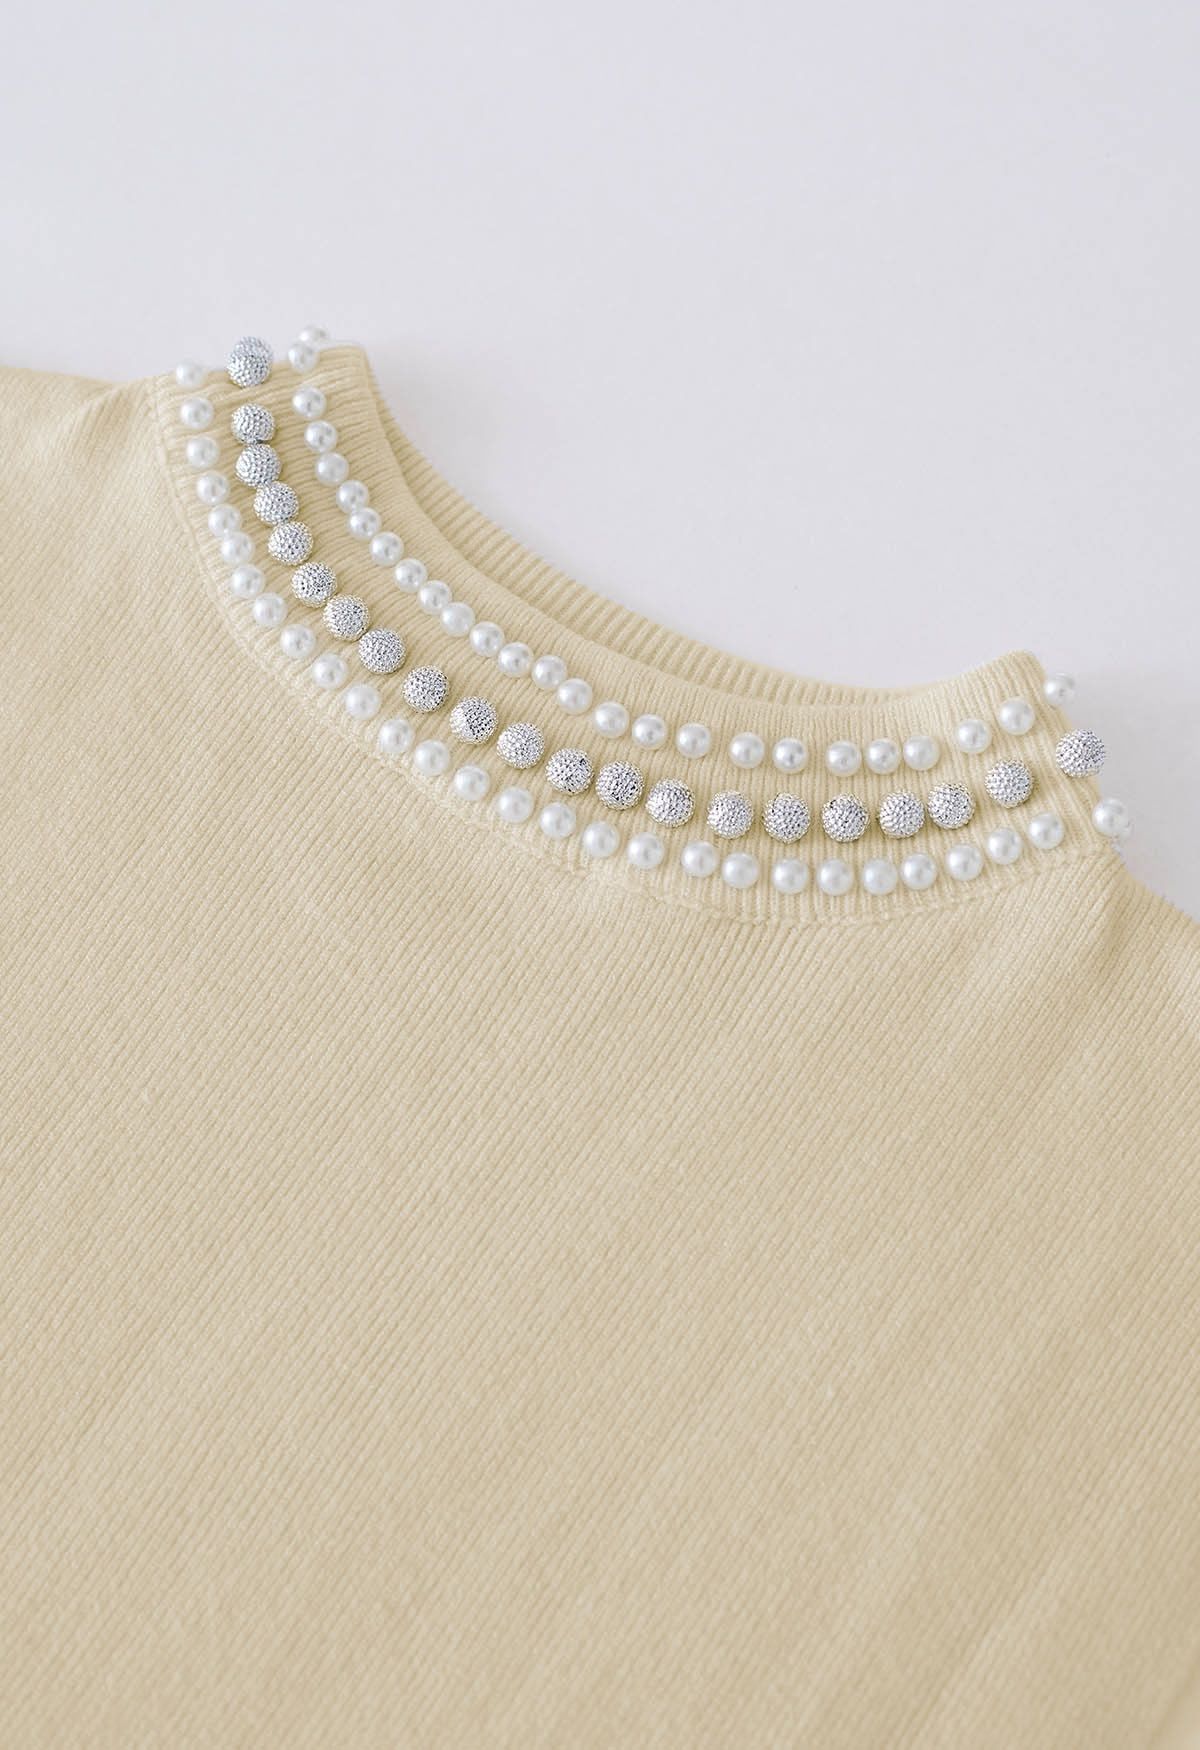 Pearl Embellished Mock Neck Sleeveless Knit Top in Sand